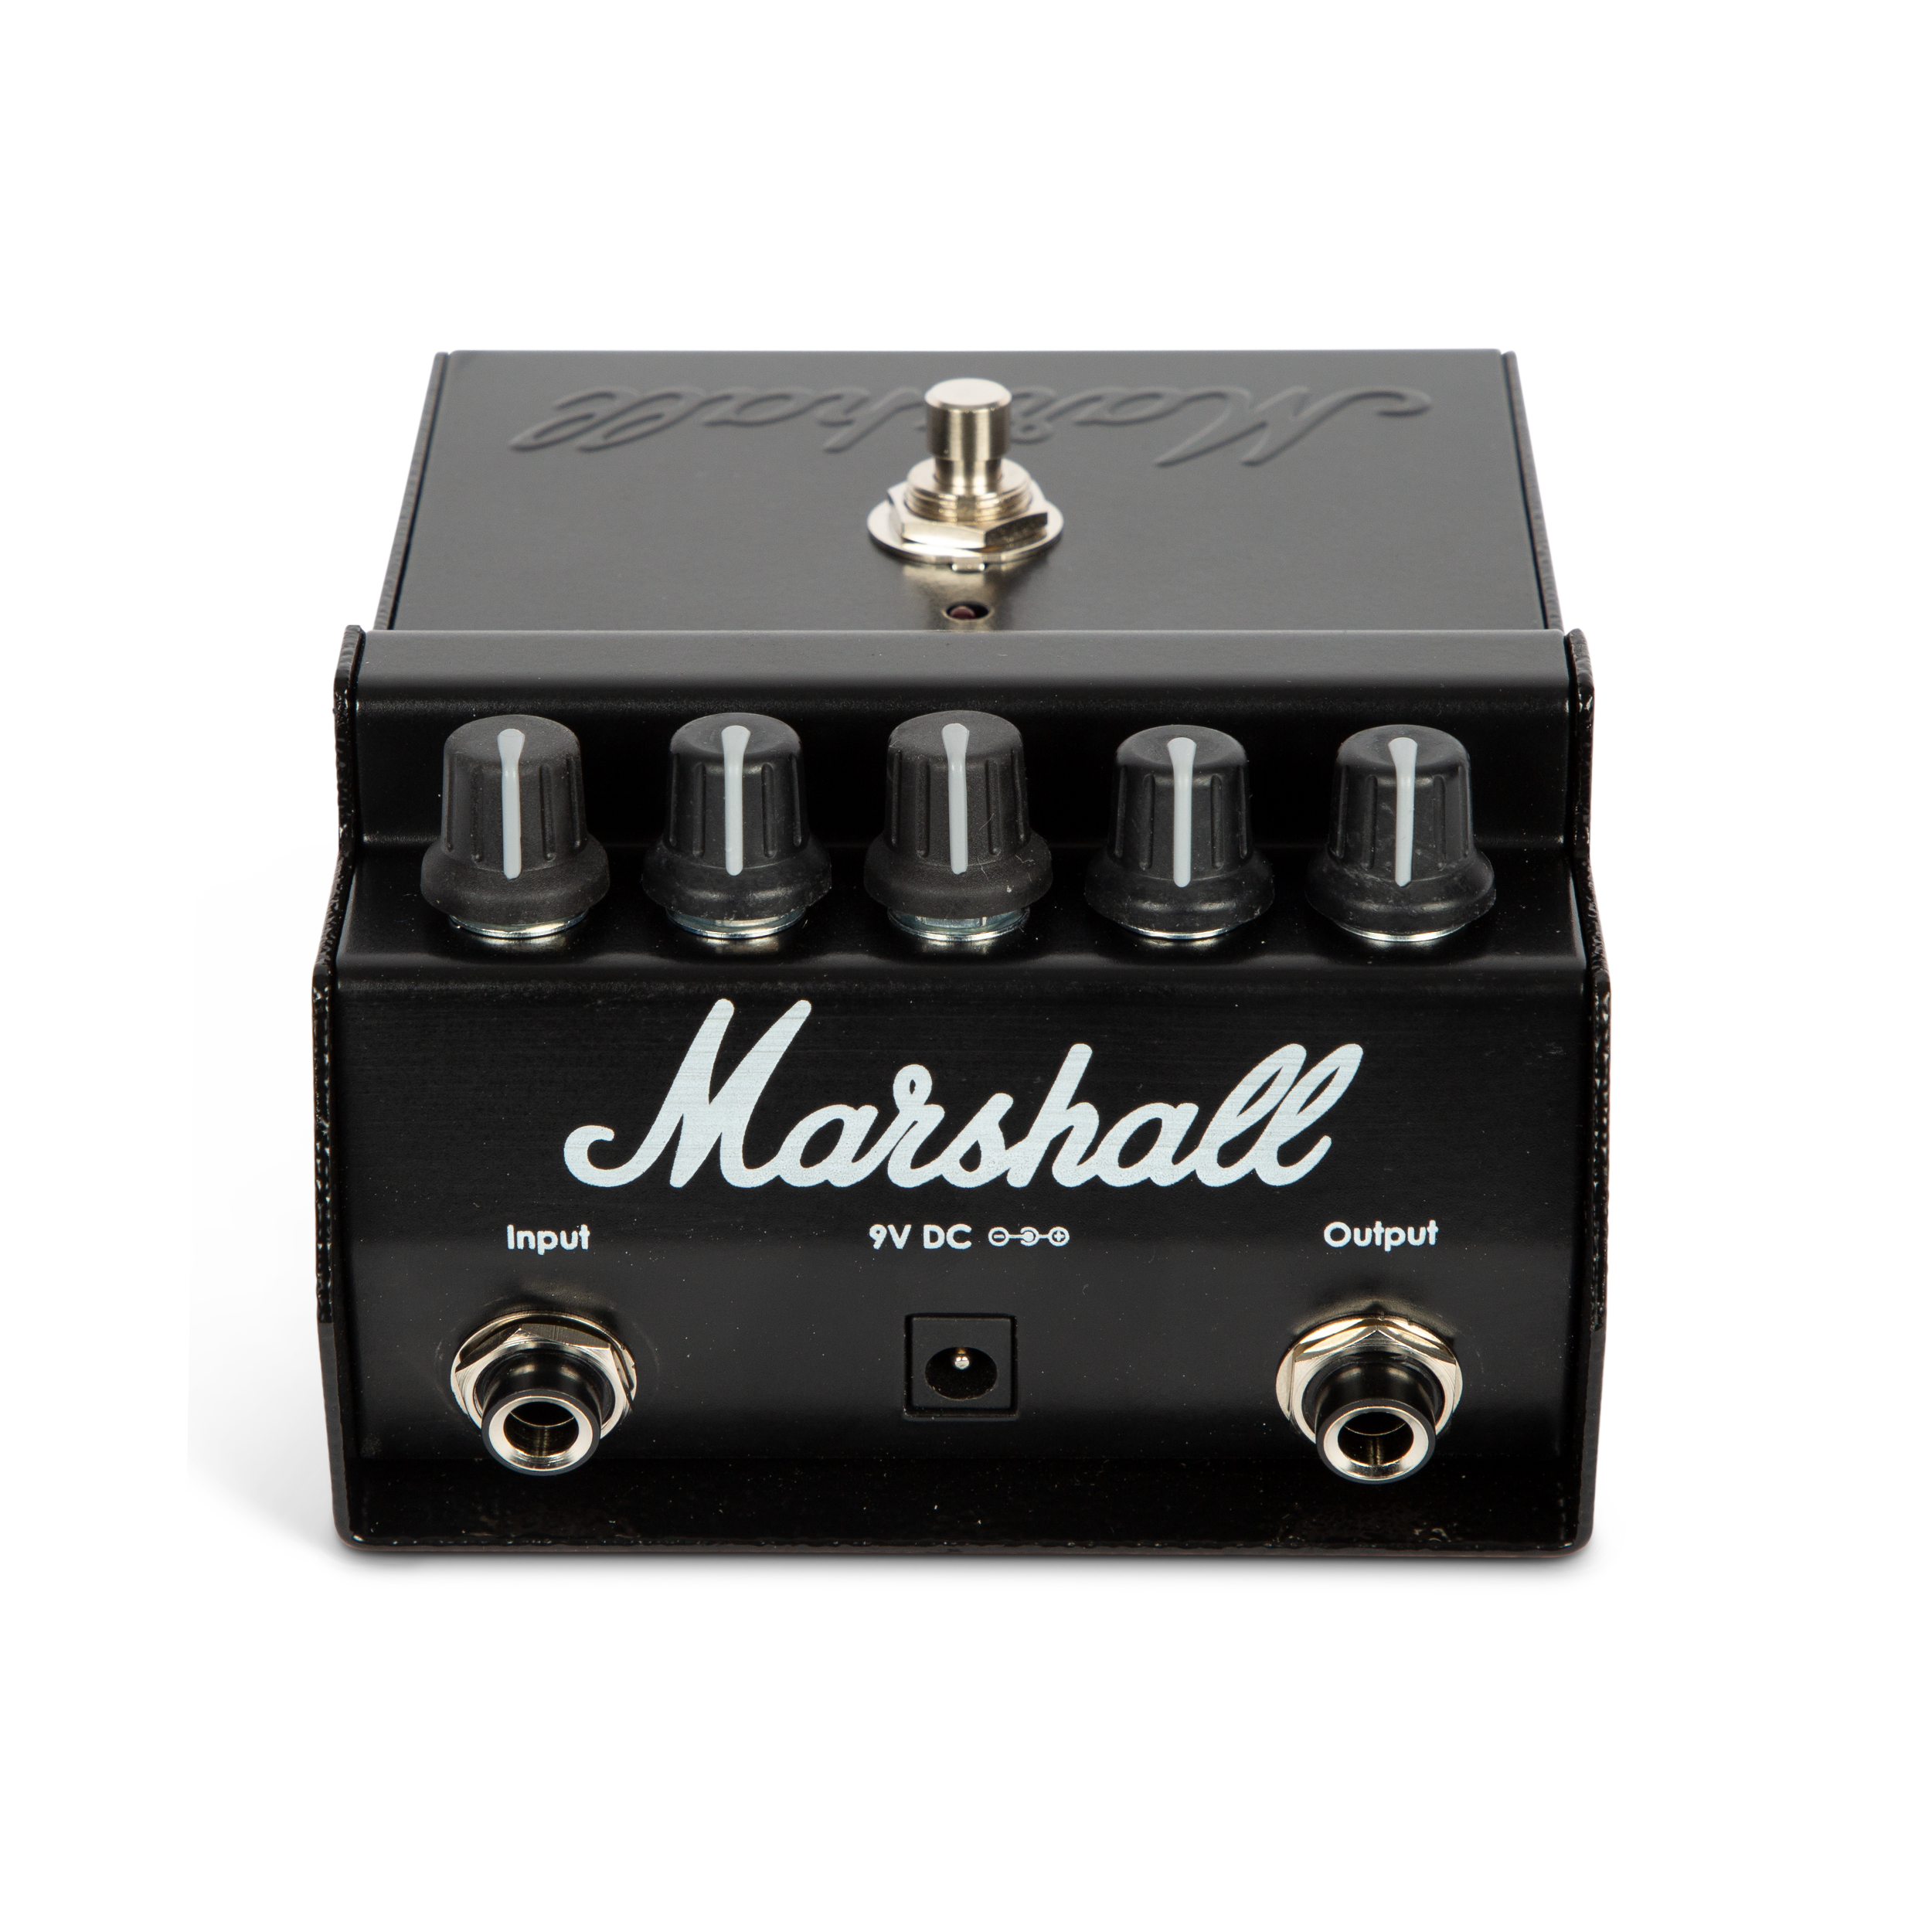 MARSHALL SHRED MASTER REISSUE PEDAL MADE IN THE UK PEDL00102